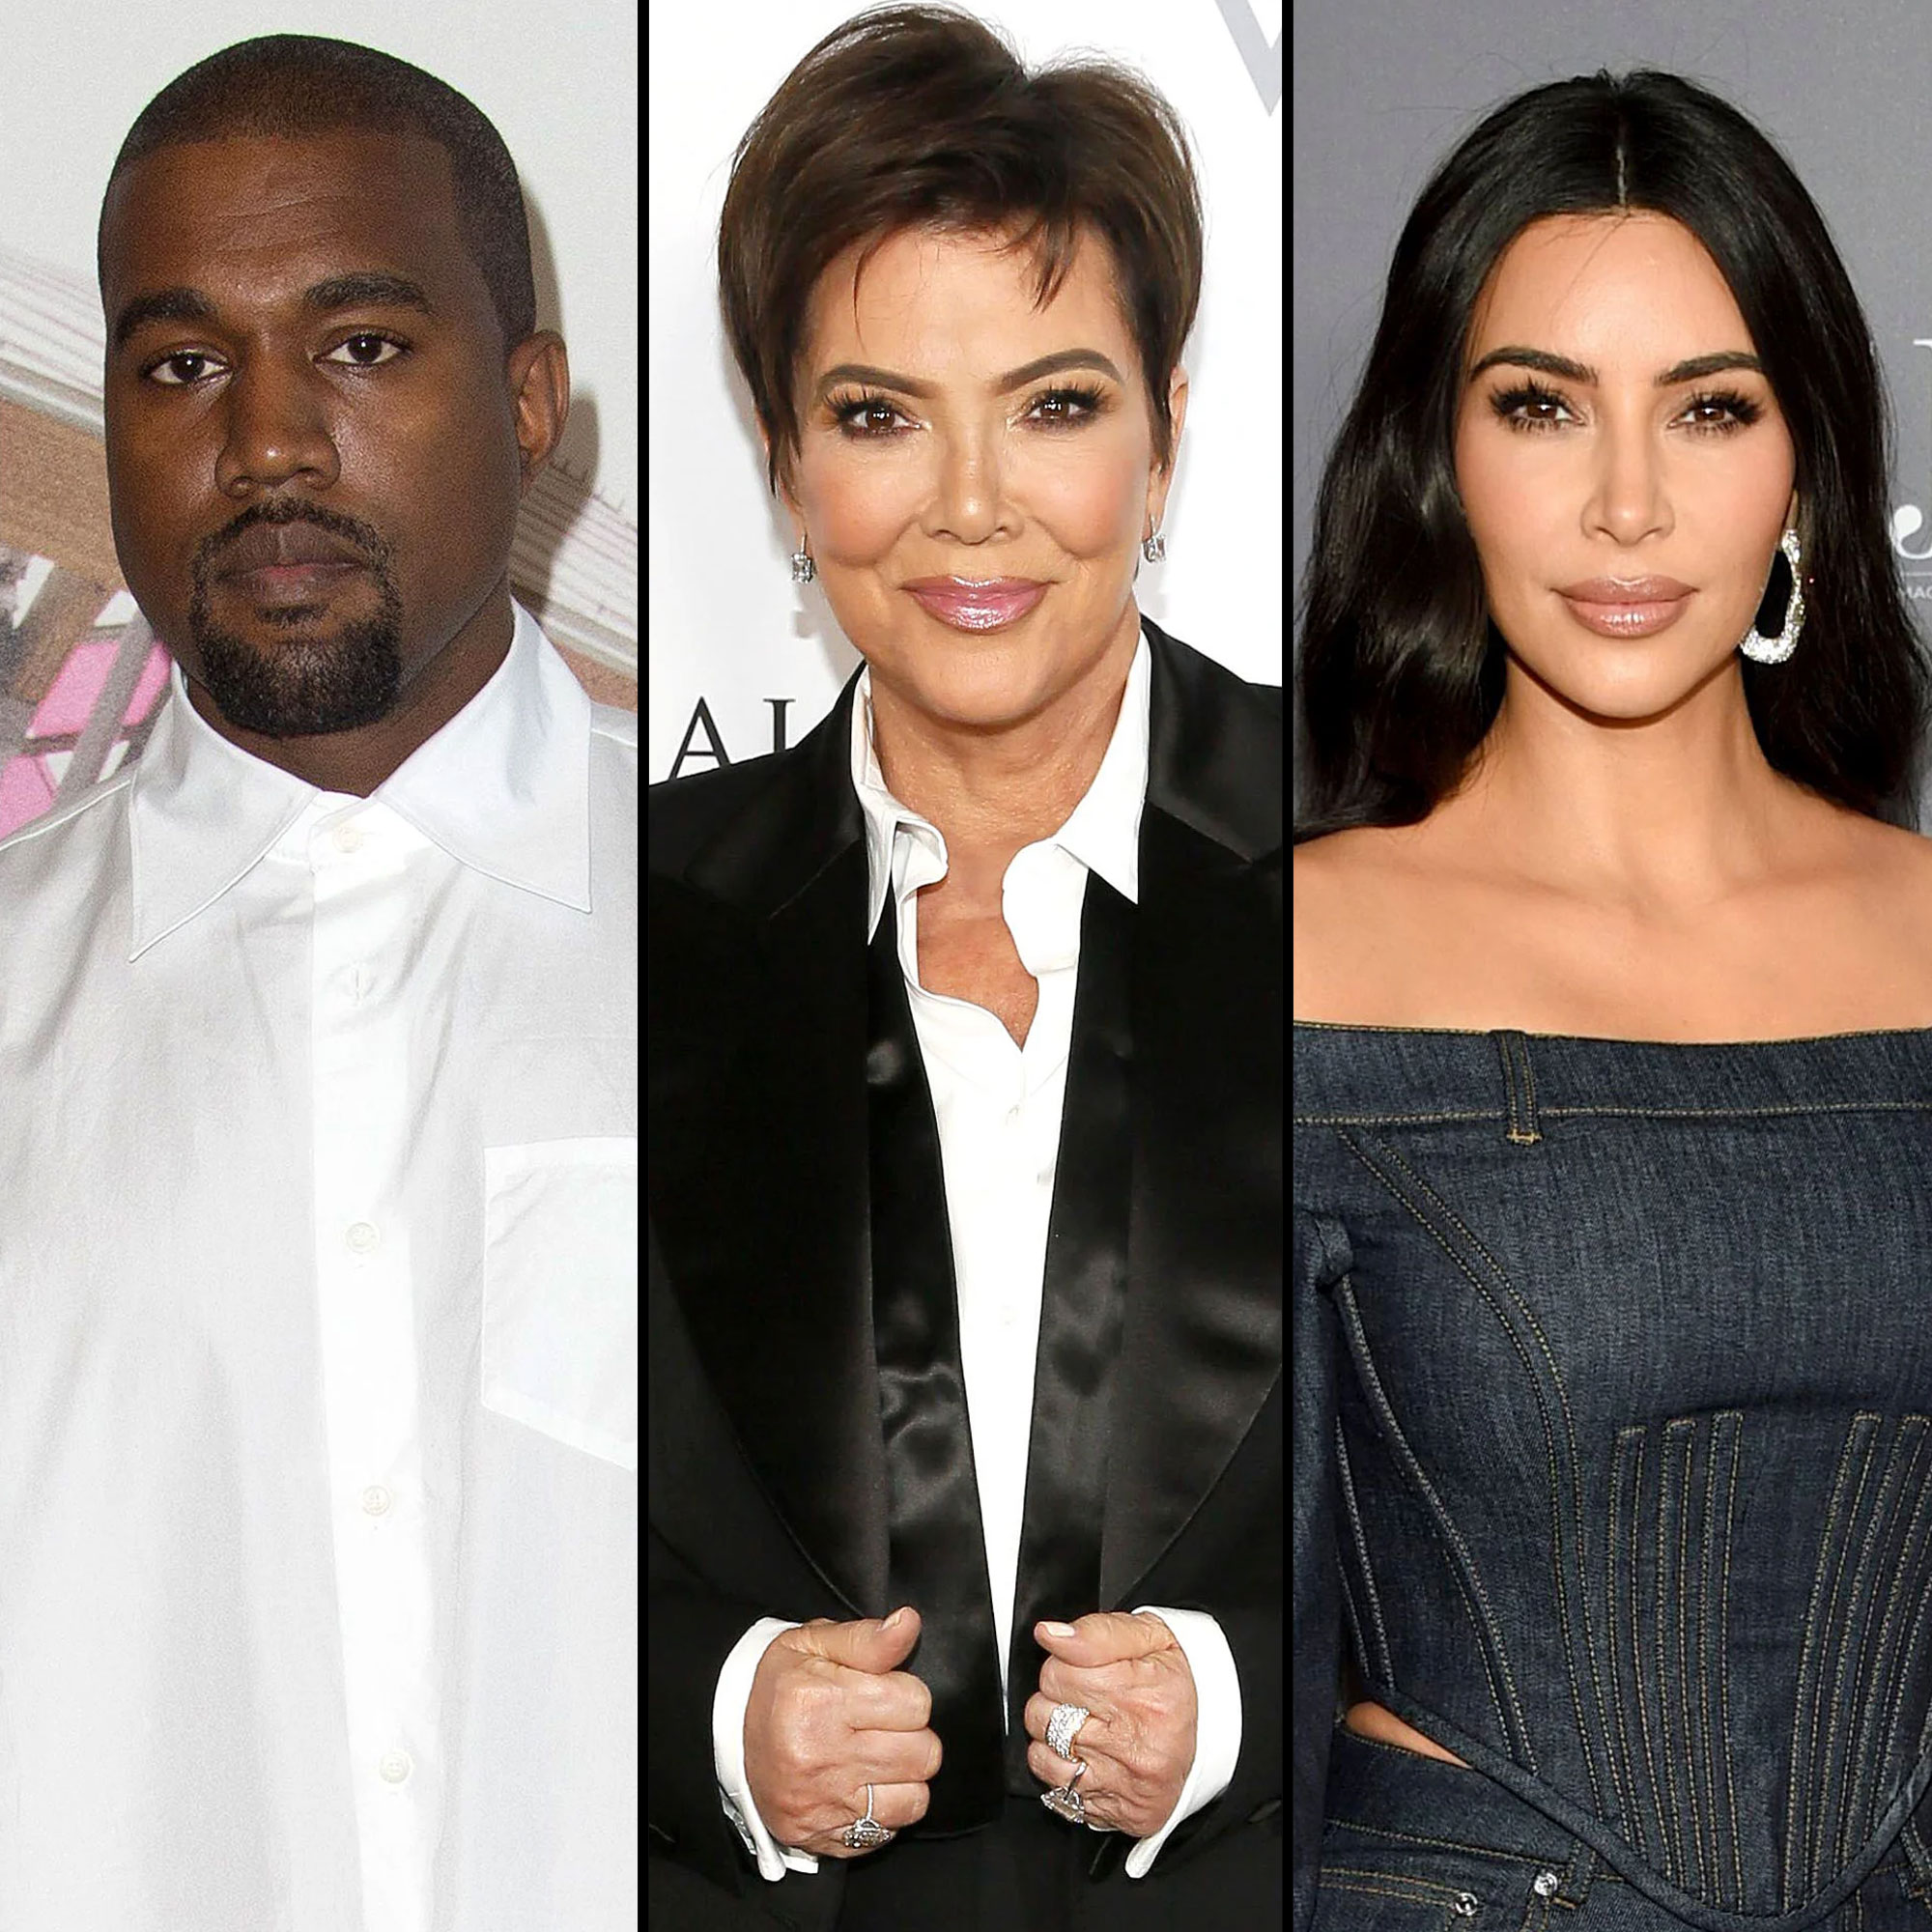 Sxxxxx Vibo - Kanye West Calls Out Kris Jenner, Claims Porn 'Destroyed' Family